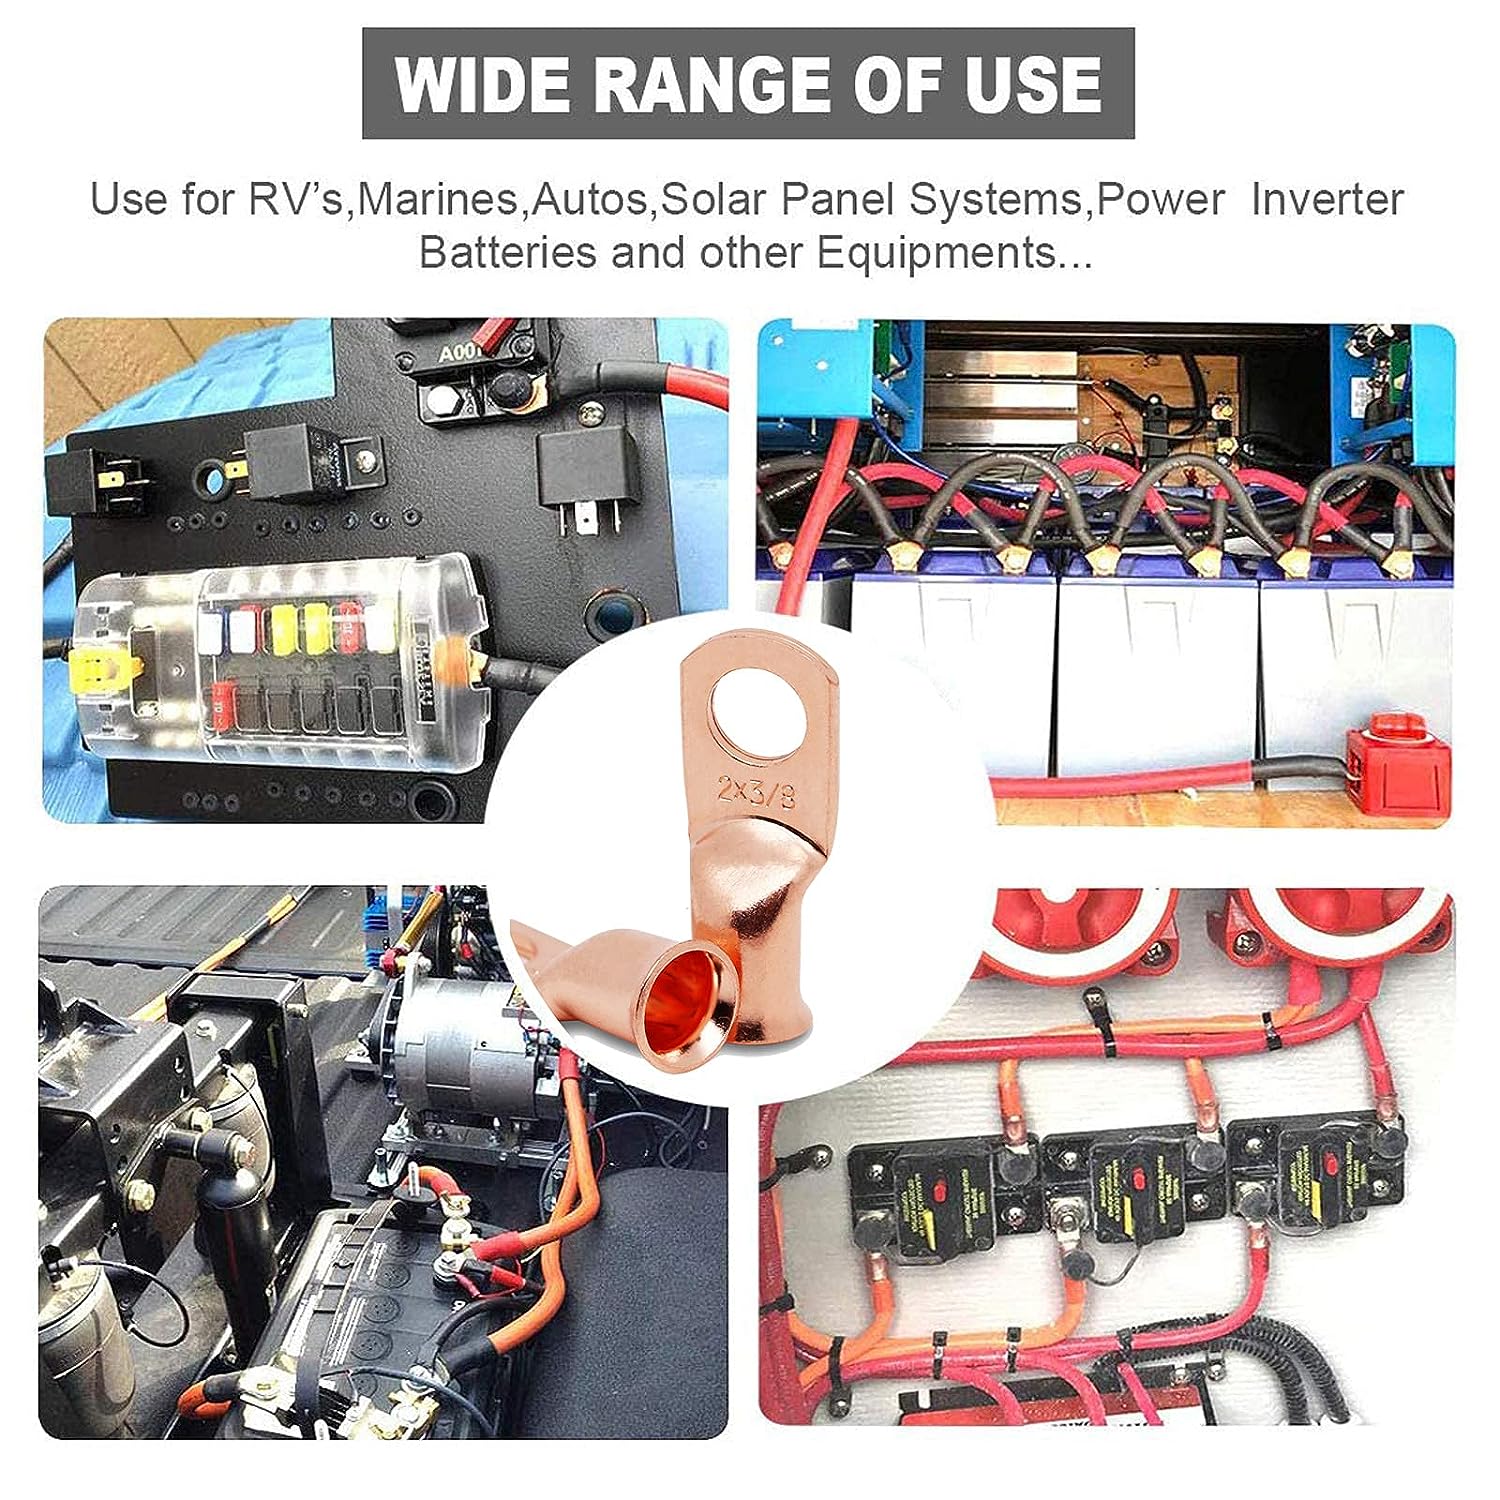 10Pcs 1/0 AWG-3/8" Battery Lugs,Heavy Duty Wire Lugs,Ring Terminal ,0 Guage Terminals,Battery Cable Ends/Terminal Connectors with 10Pcs 3:1 Heat Shrink Tubing